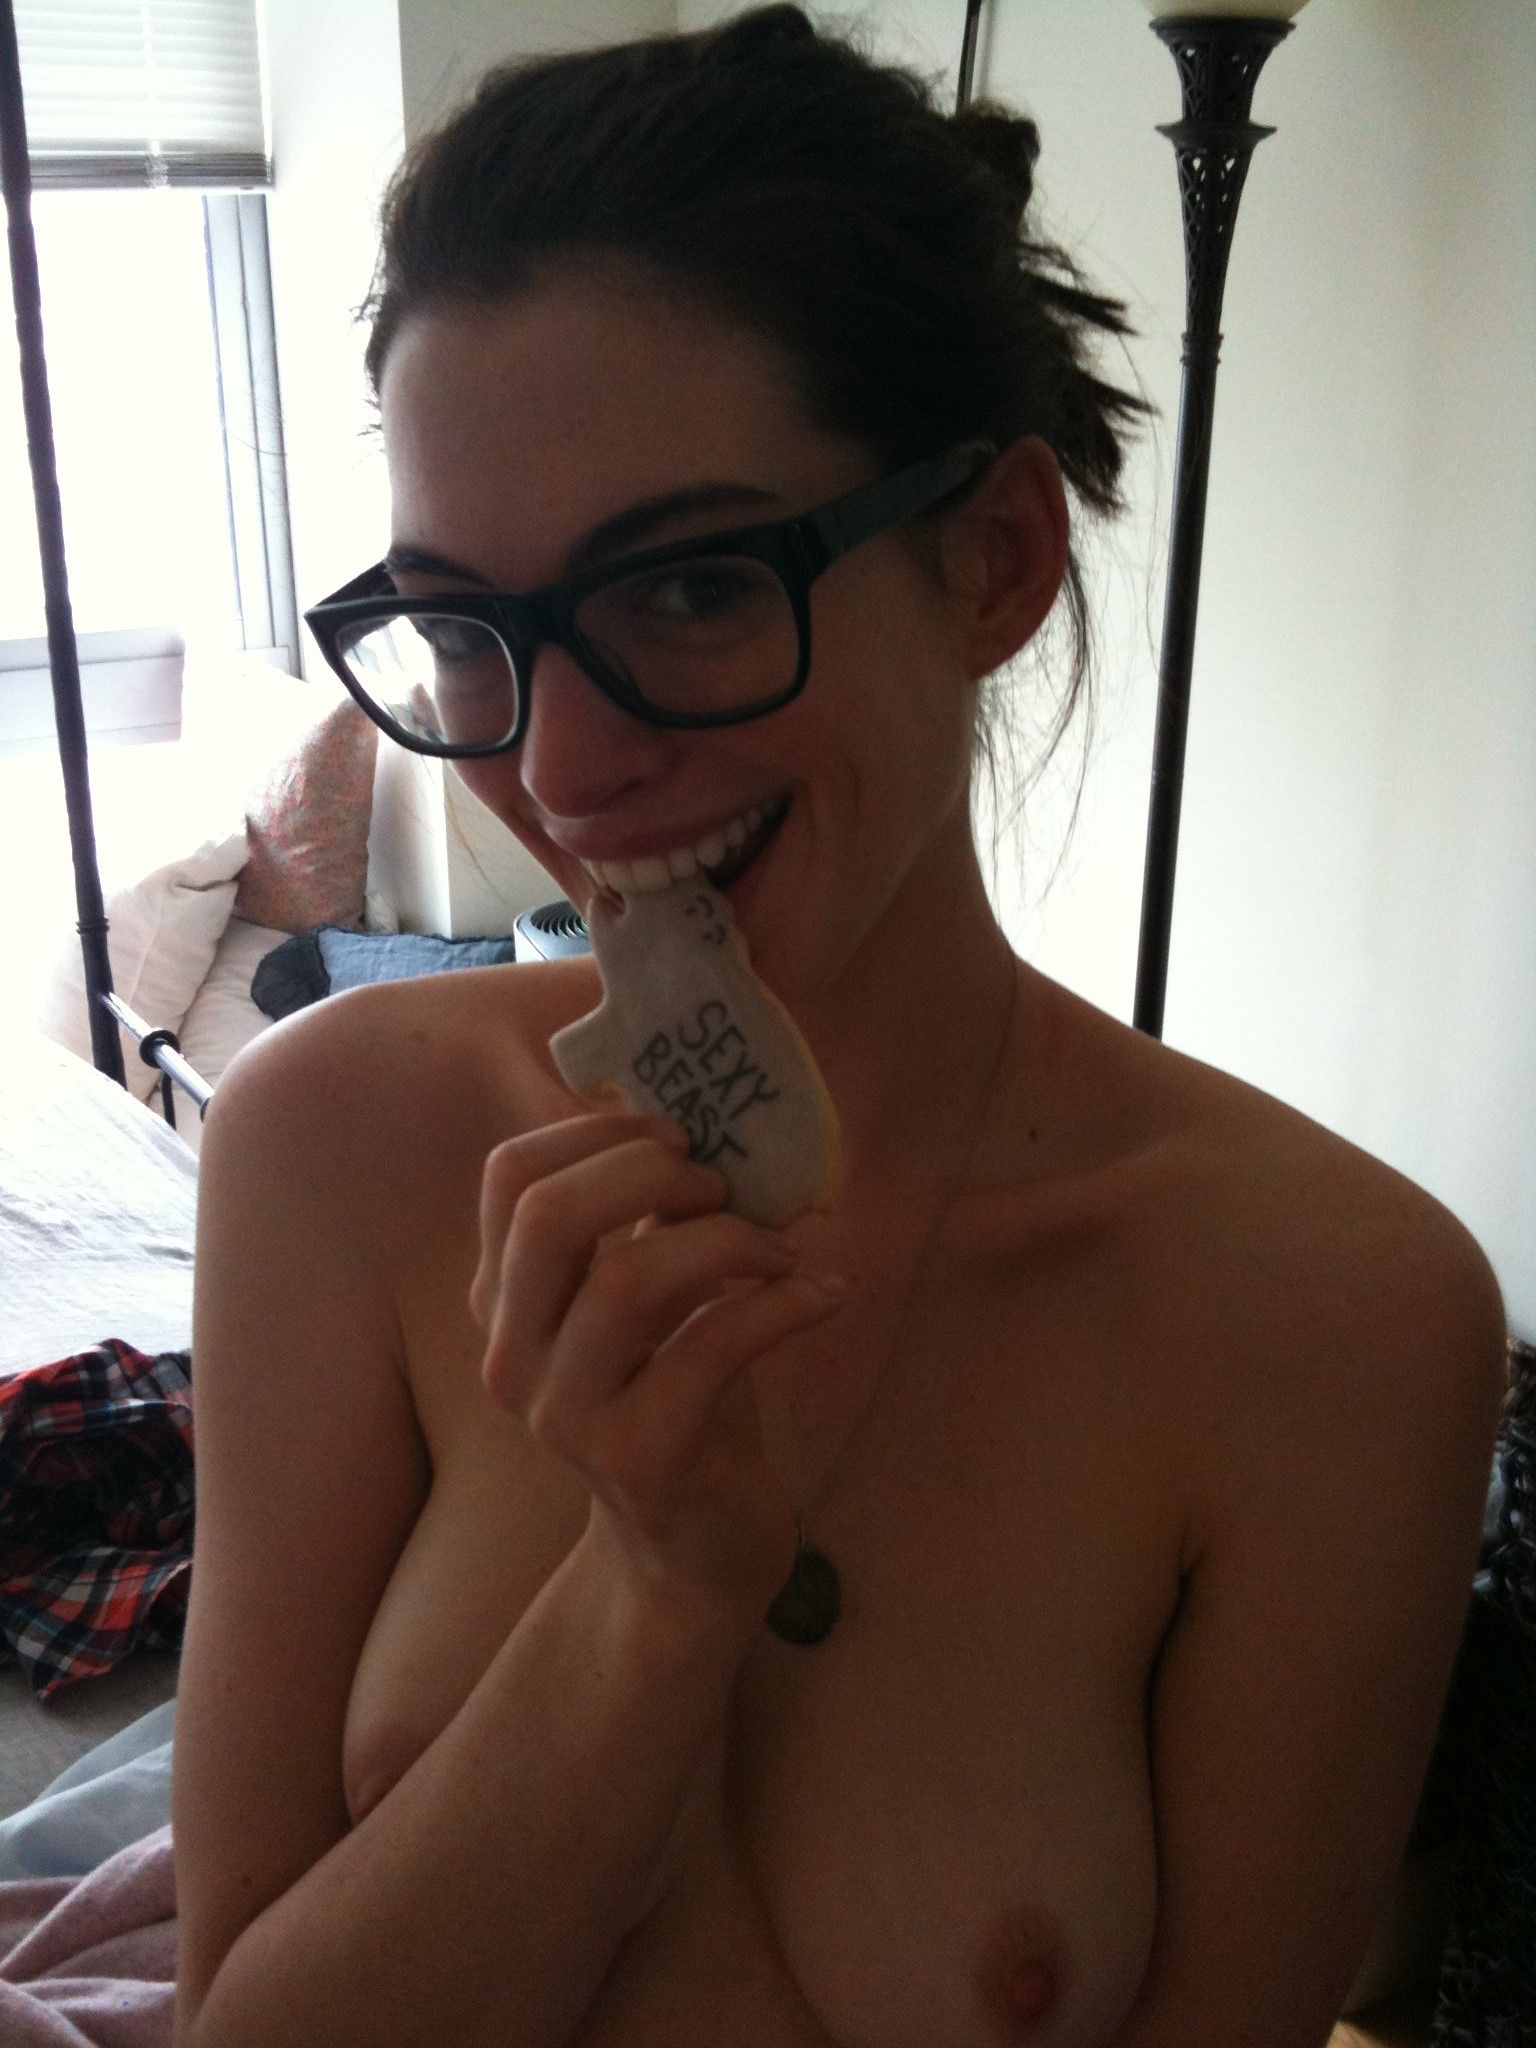 Anne hathaway naked pics